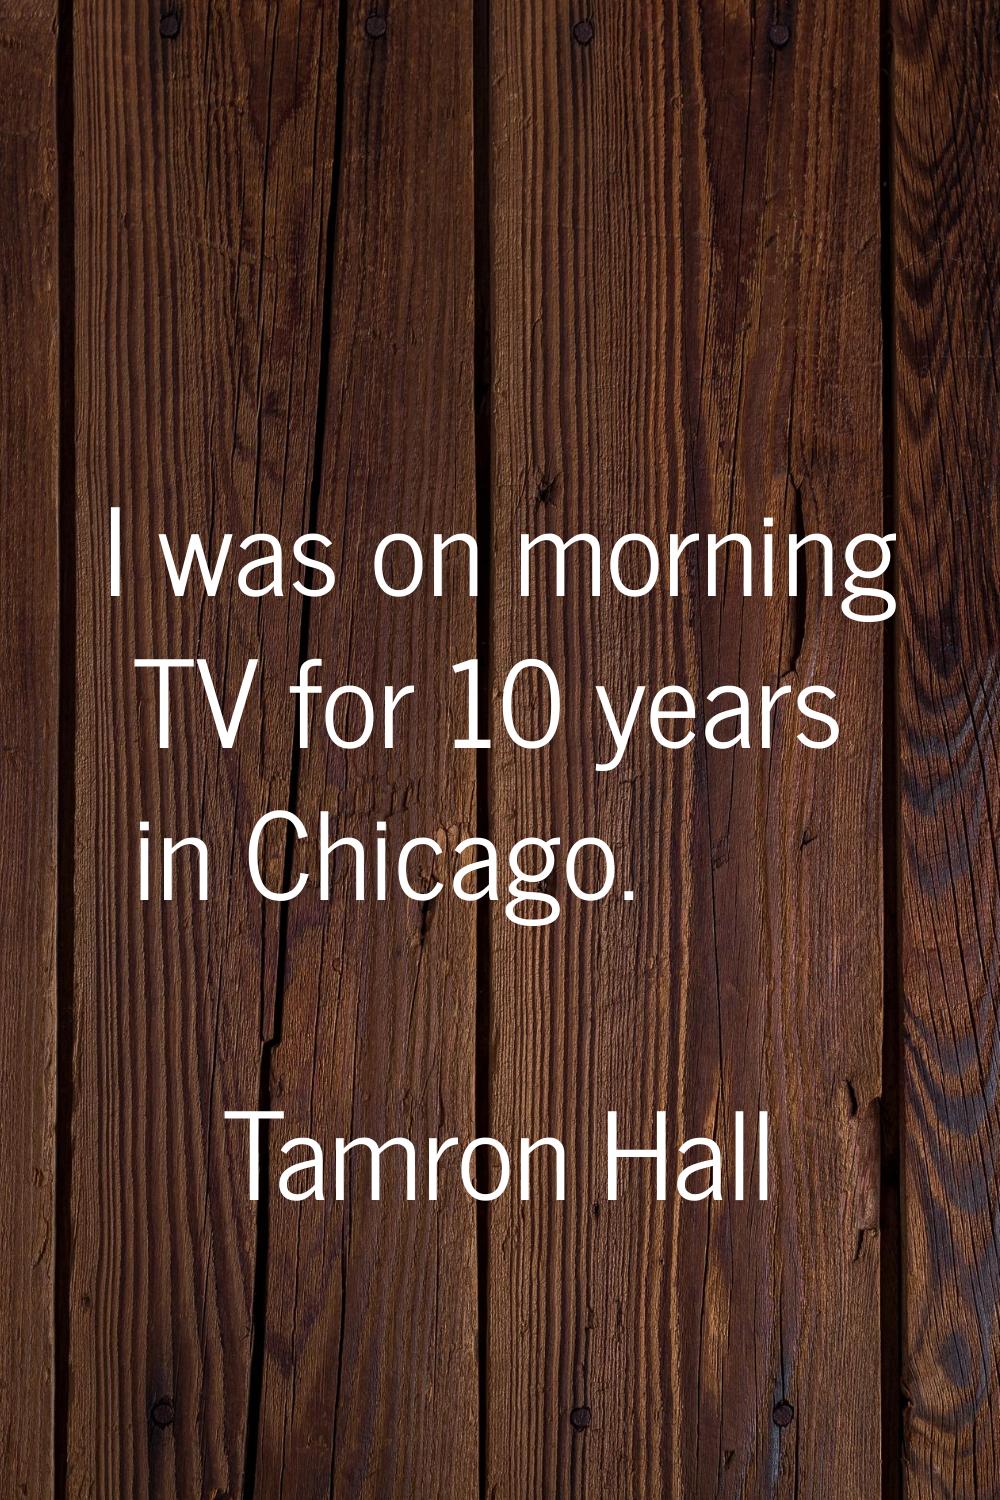 I was on morning TV for 10 years in Chicago.